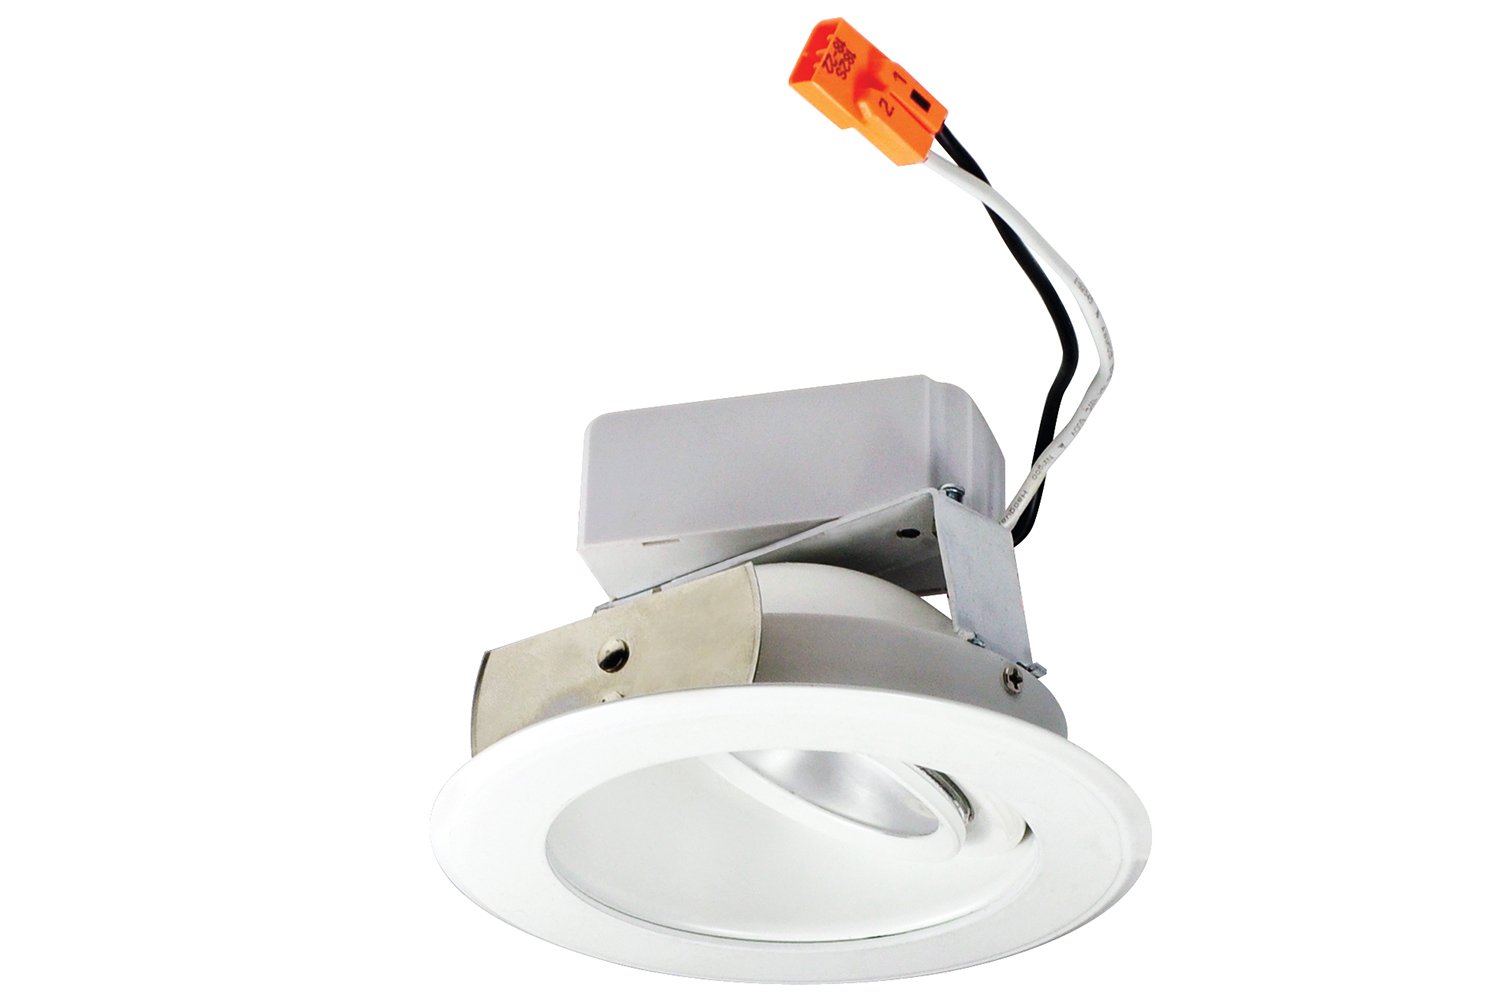 Nora Lighting expanded its Cobalt LED retrofit series with new 4 5 and 6 models